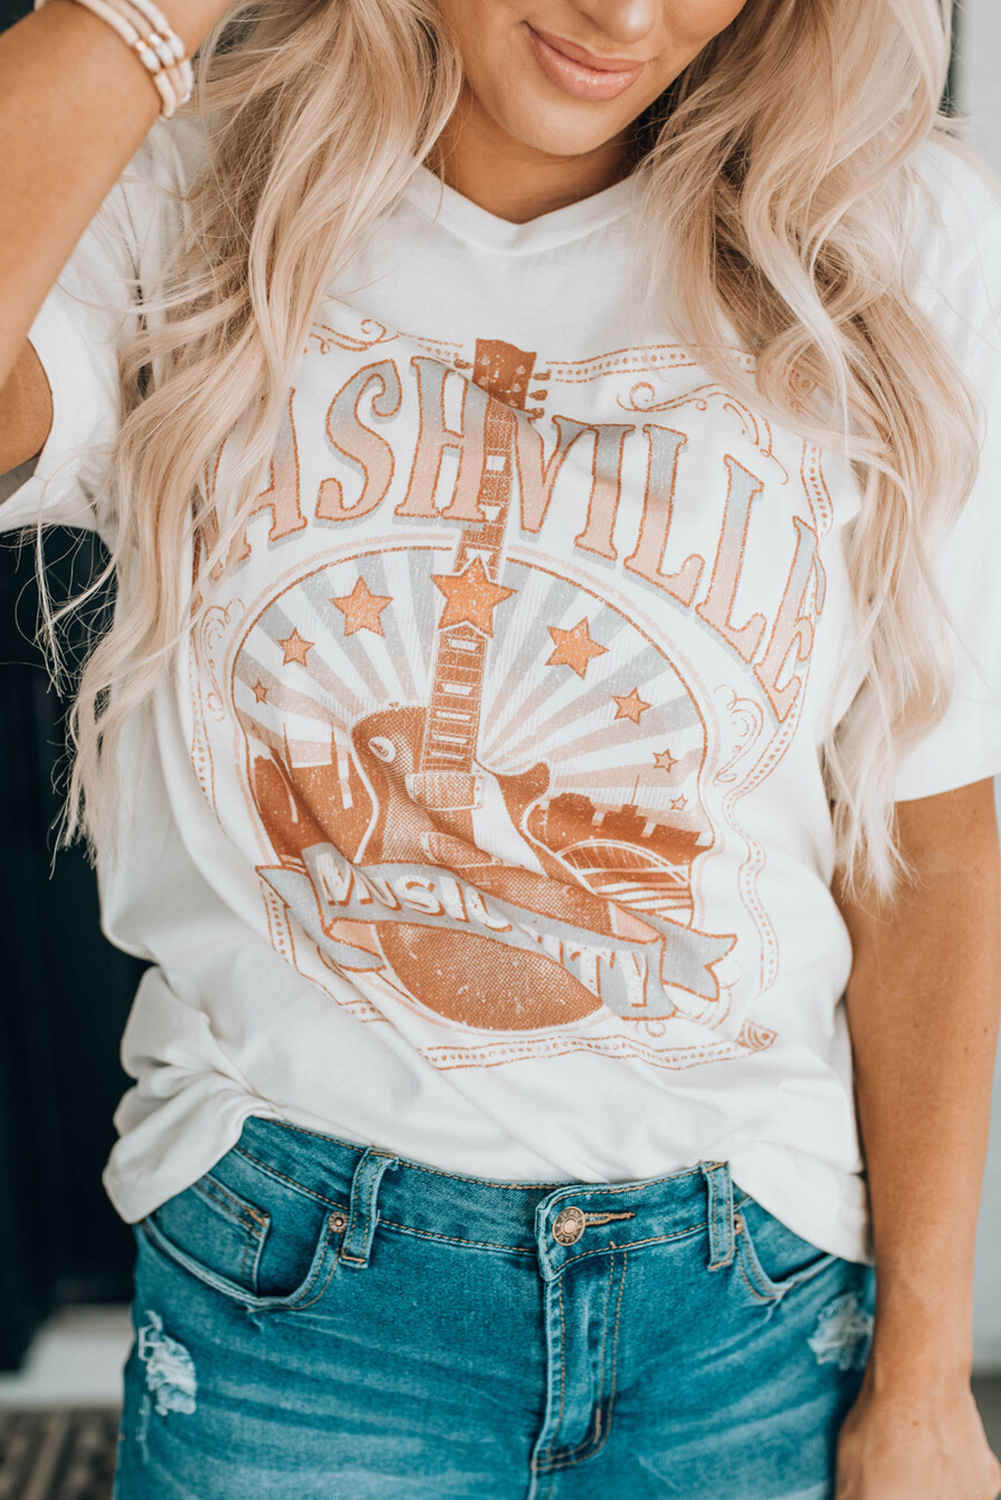 Fashionable ways to wear women's graphics tees 